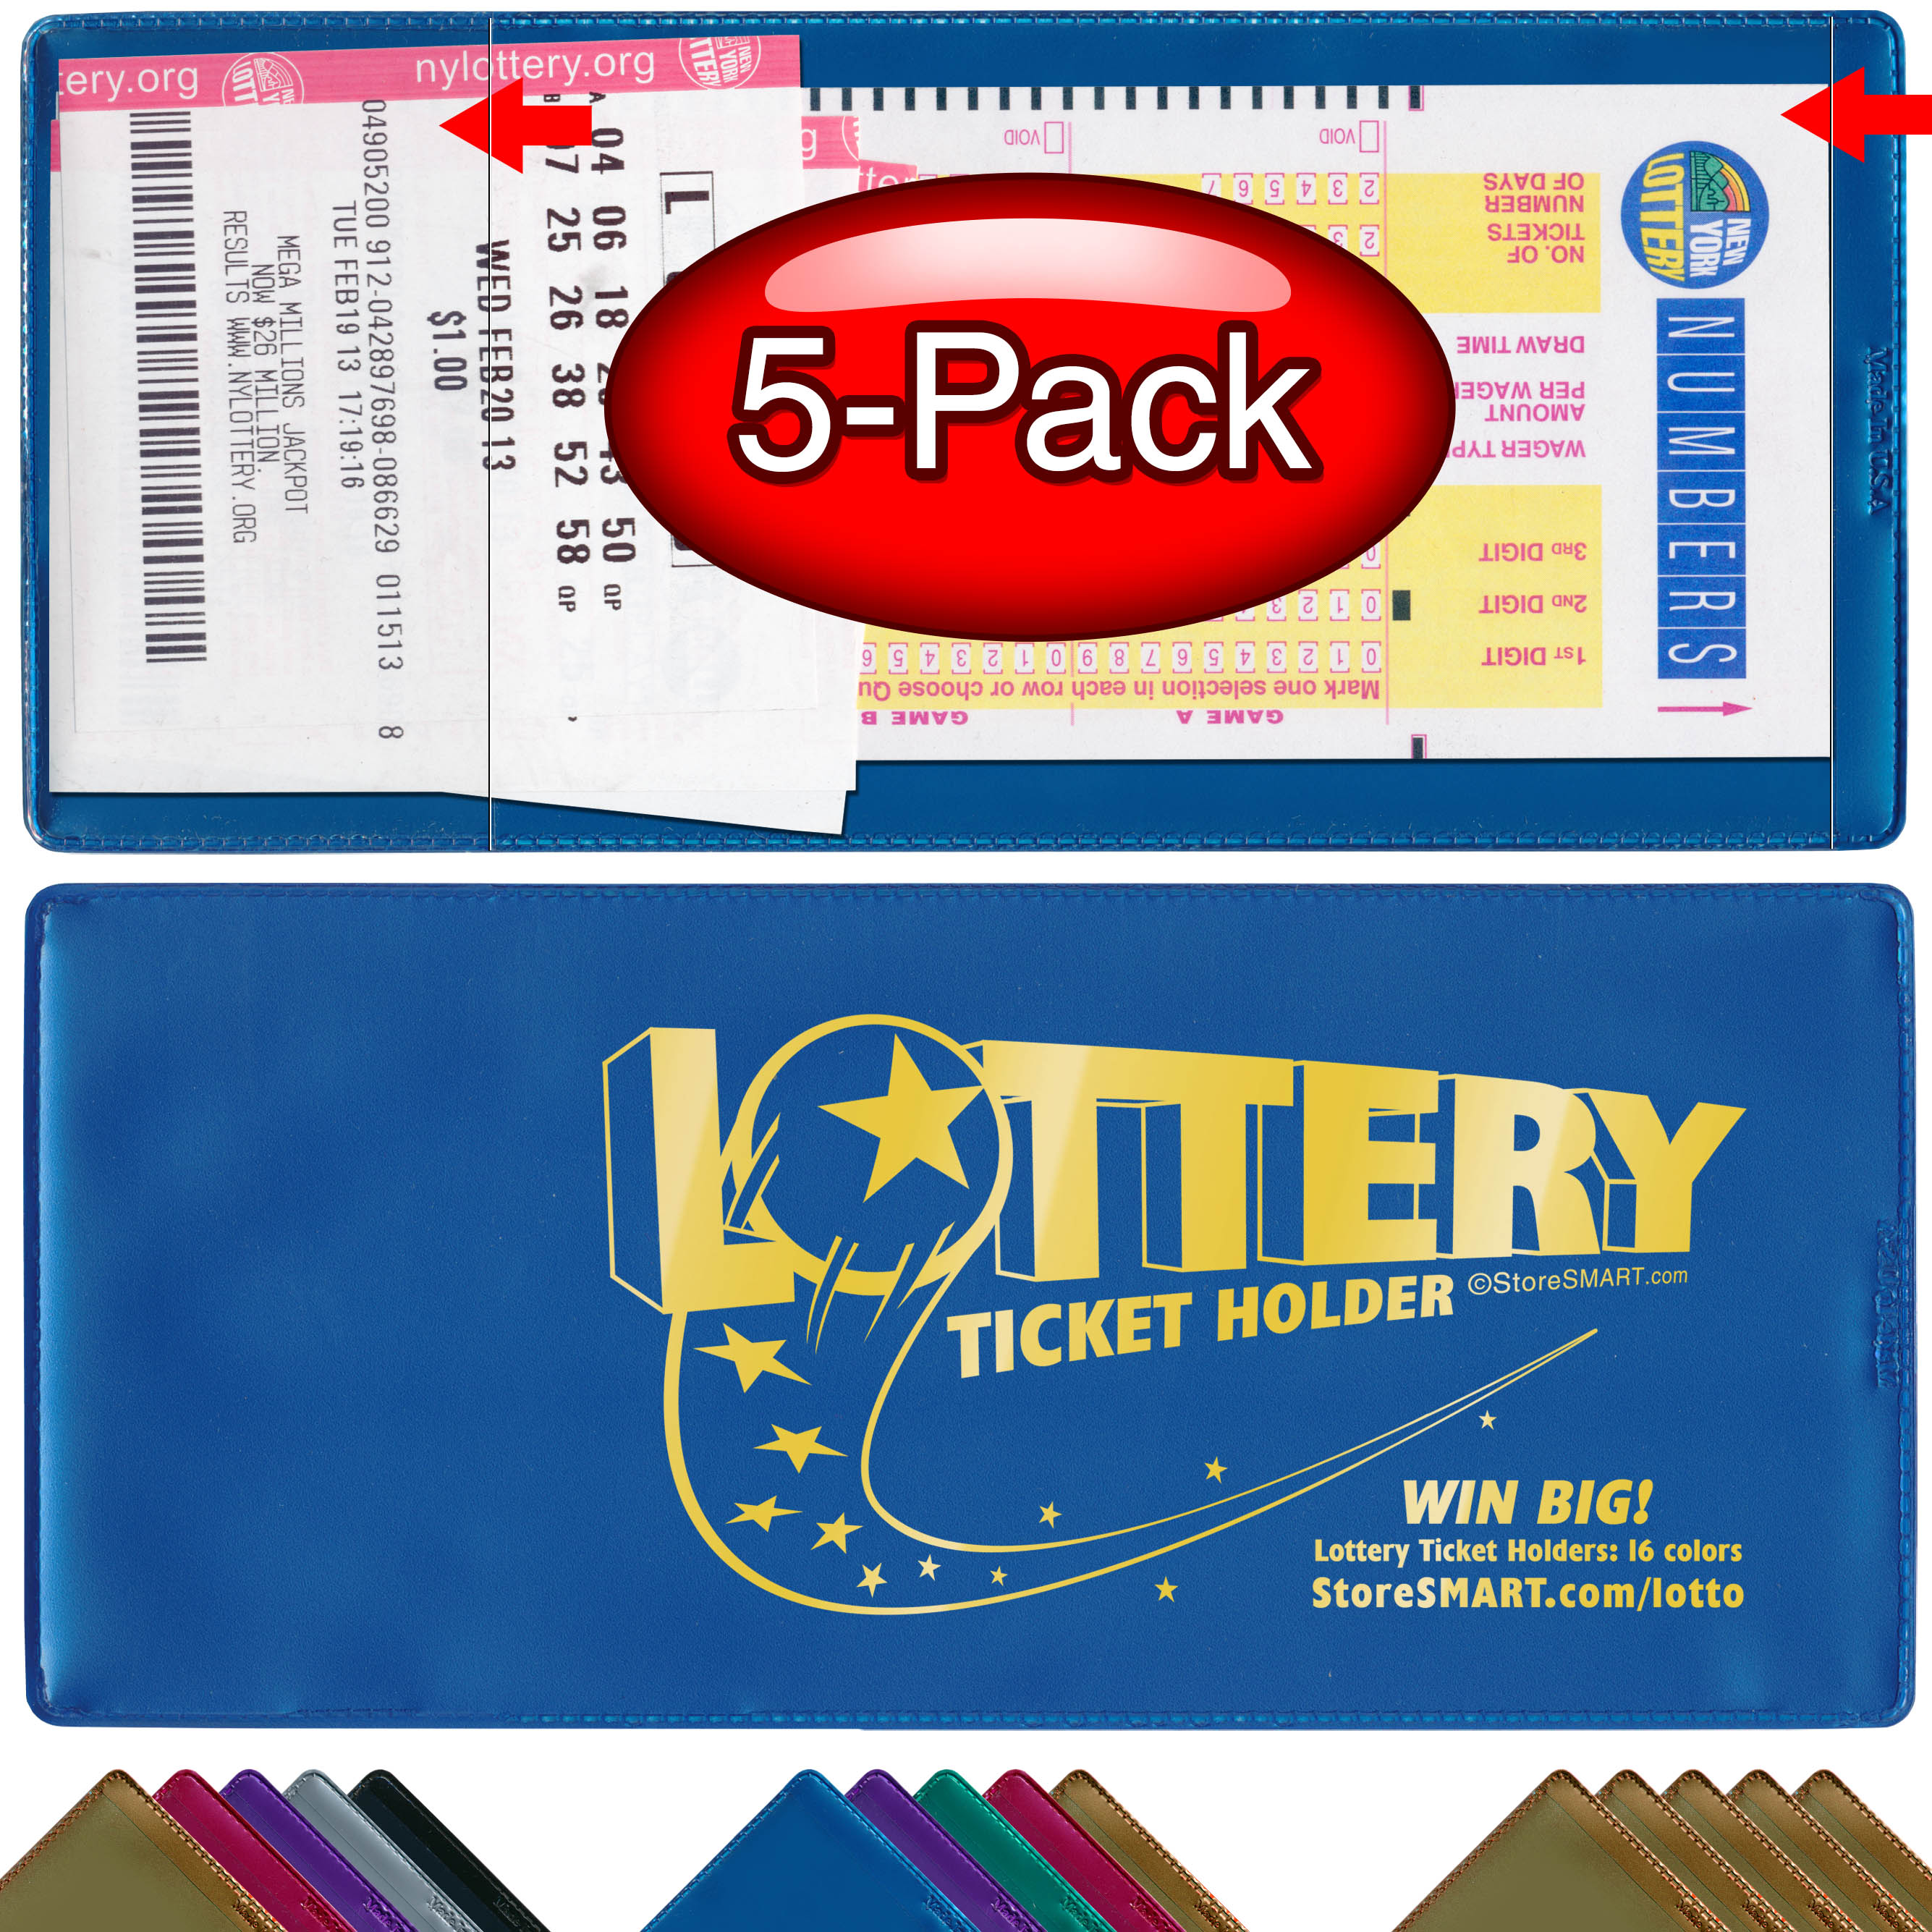 Lotto Ticket Holders 5-Packs: StoreSMART - Filing, Organizing, and